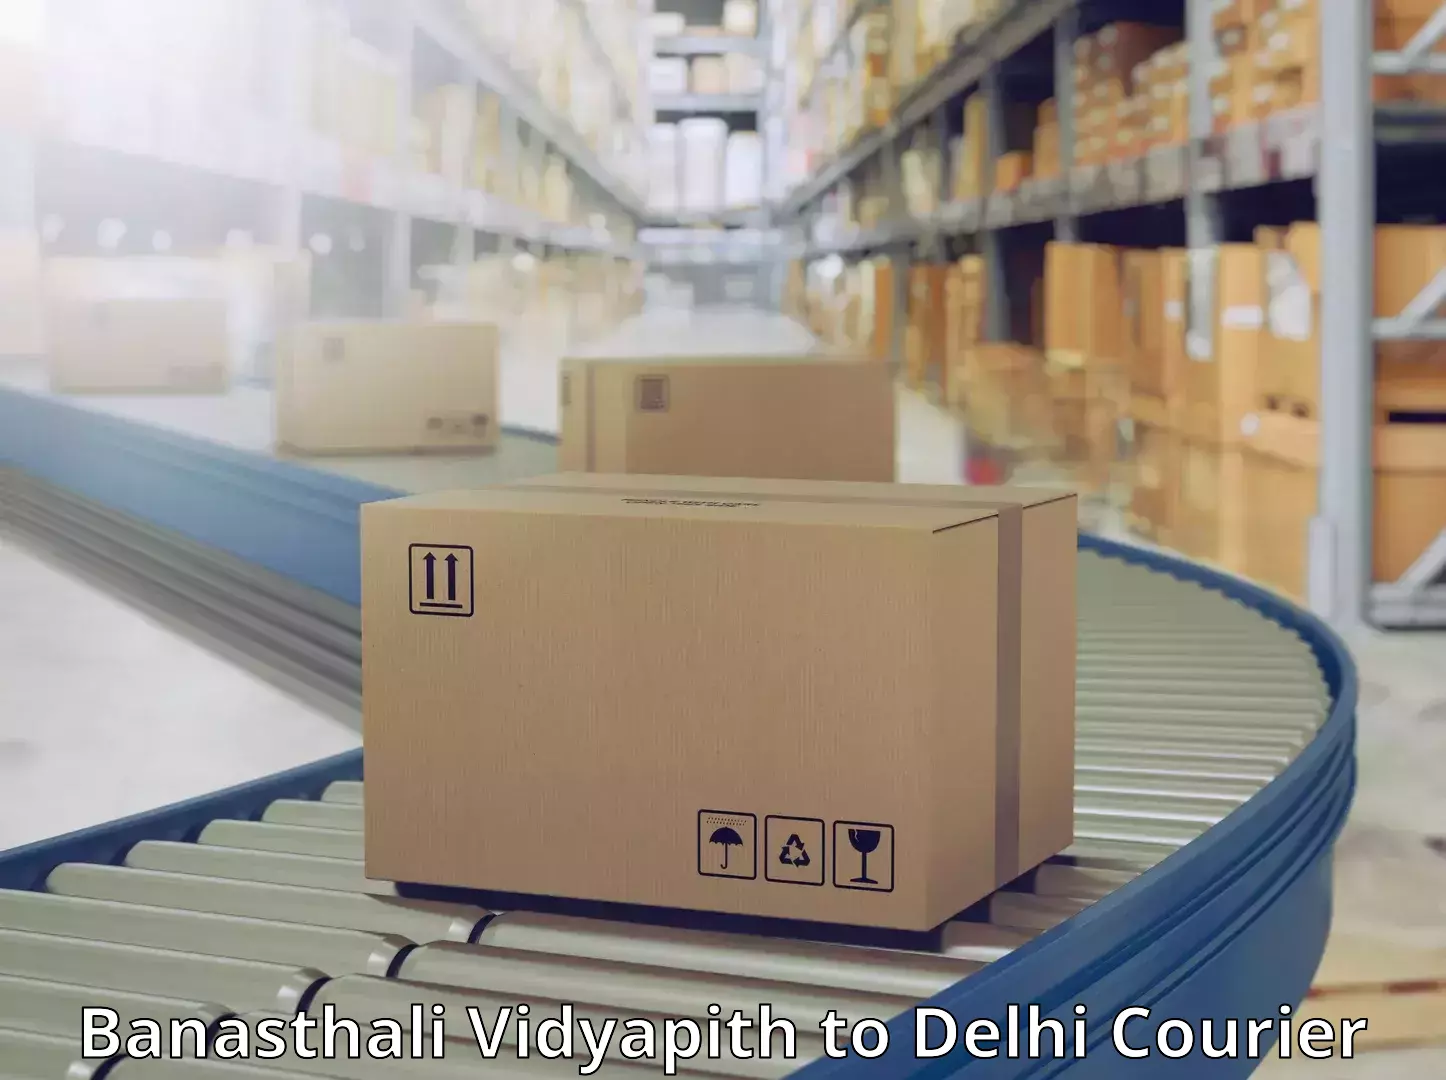 Online package tracking Banasthali Vidyapith to NCR